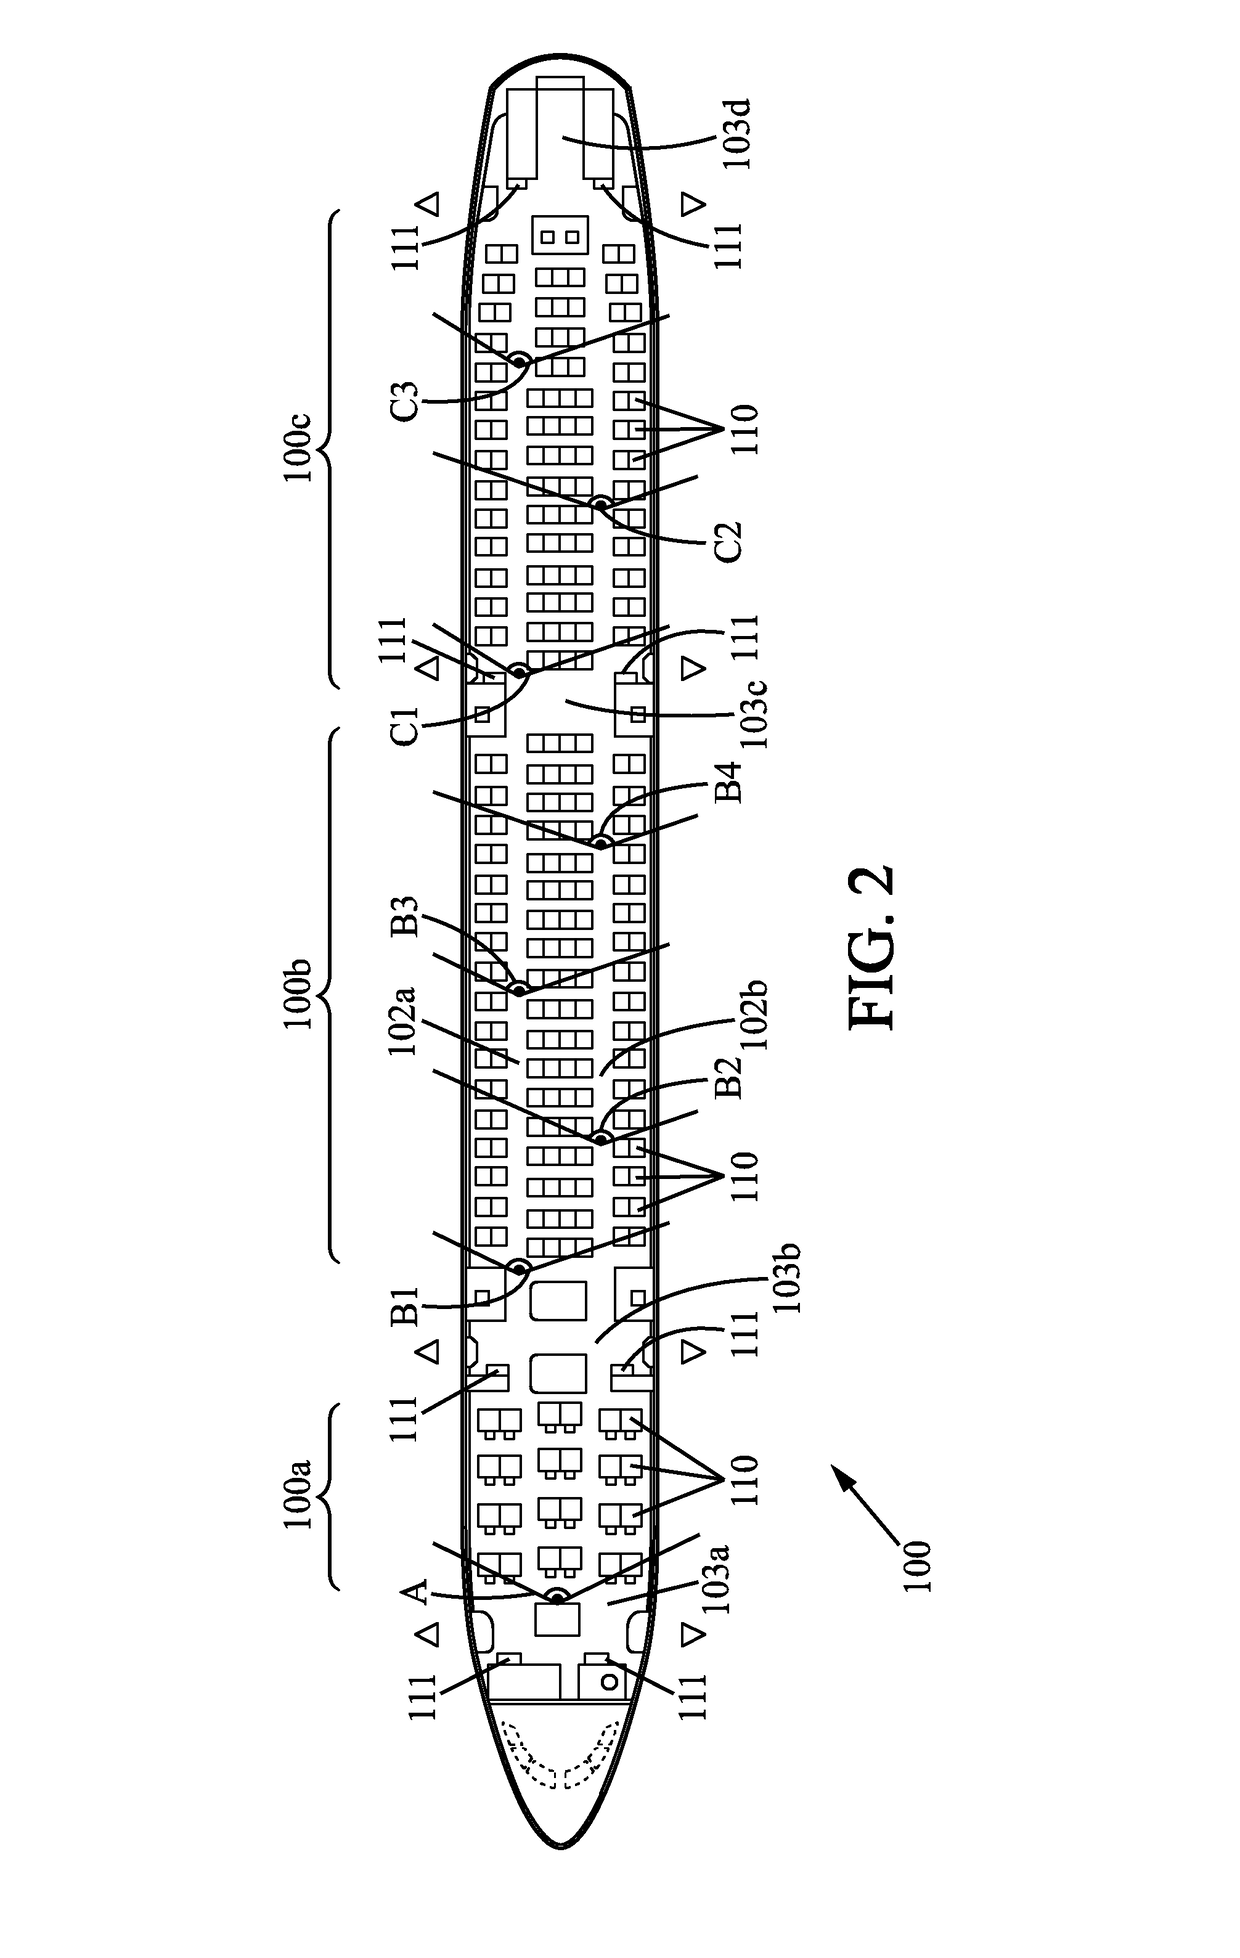 Cabin monitoring system and cabin of aircraft or spacecraft